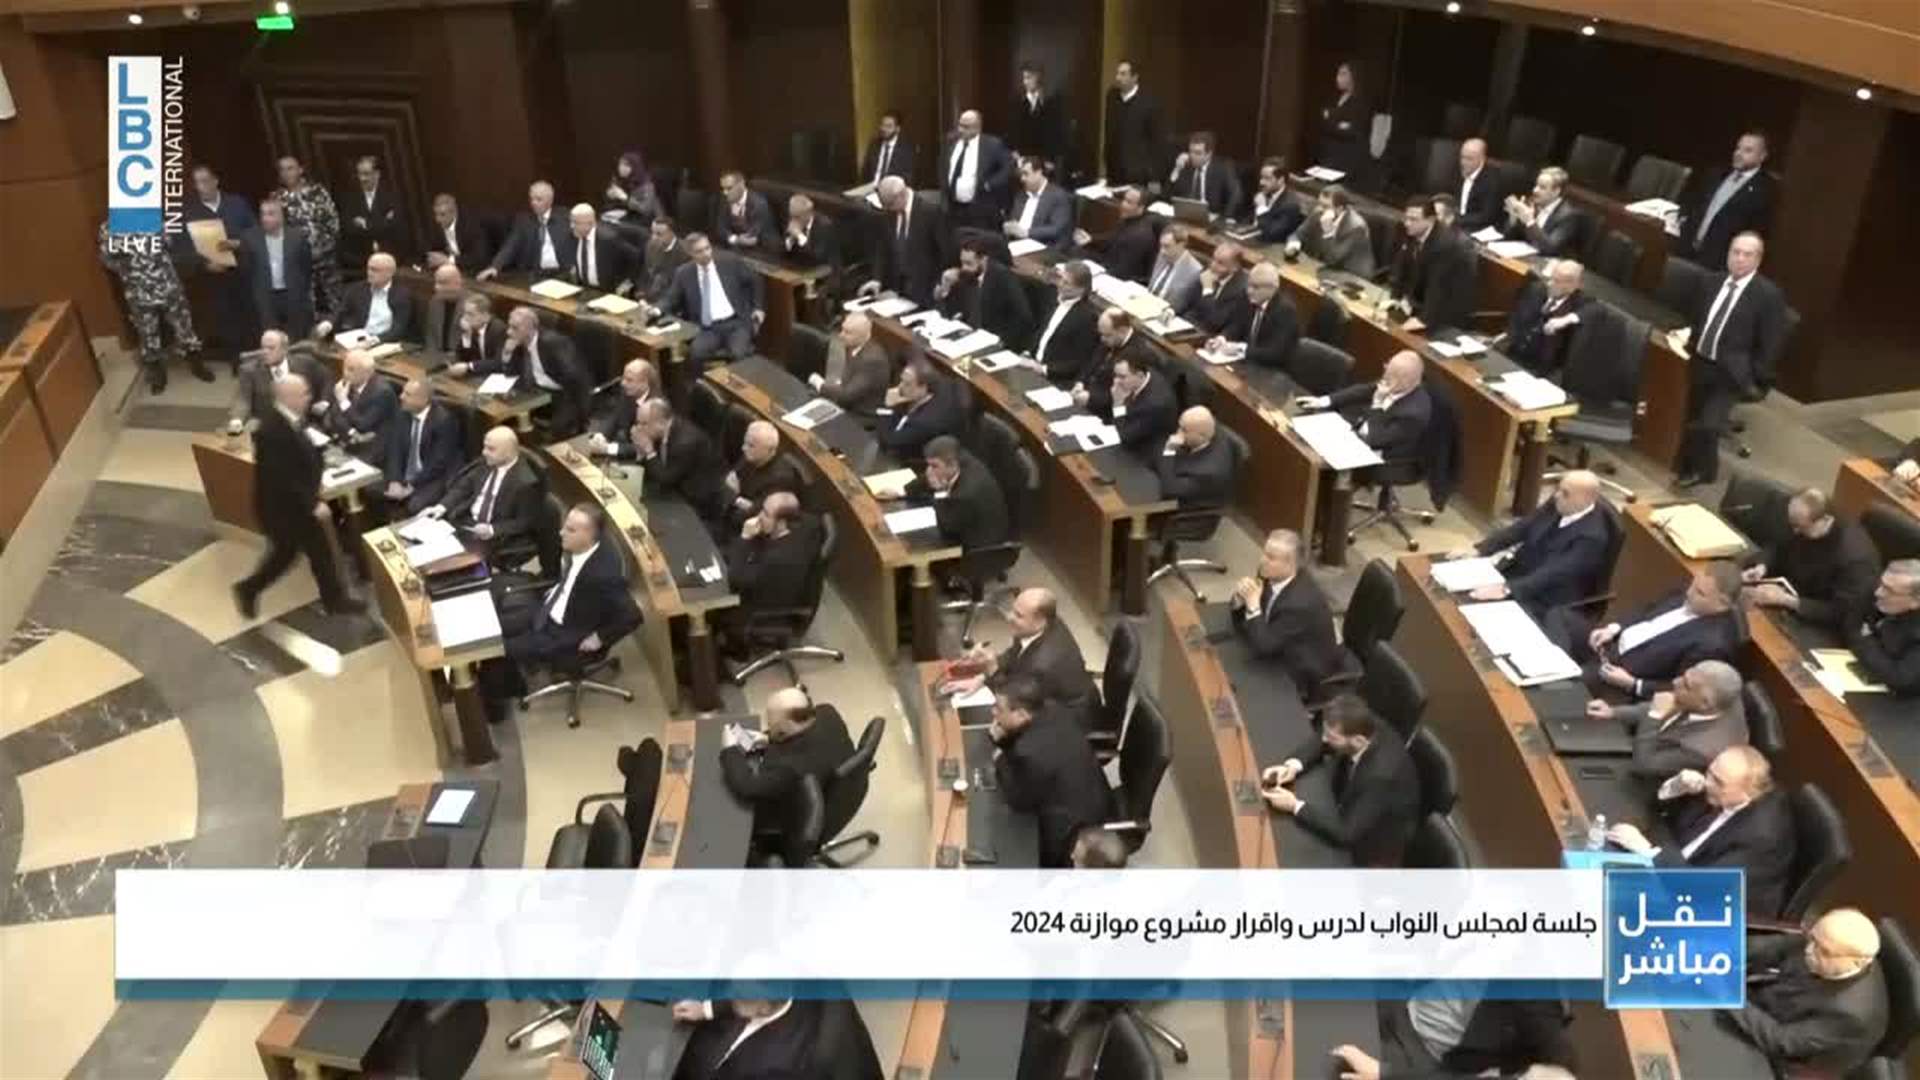 Tensions erupt in the Parliament during budget session